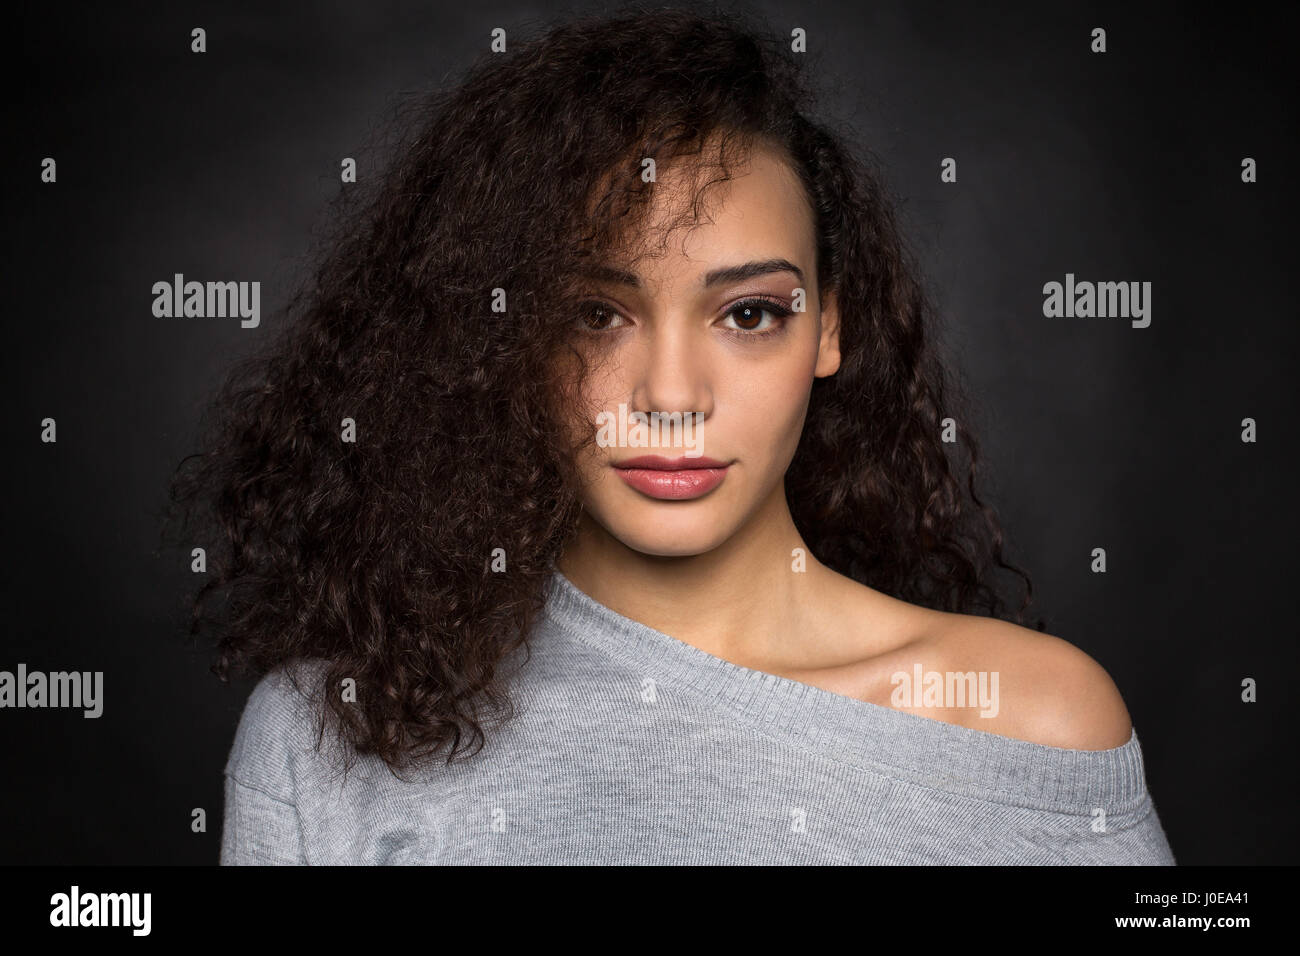 Young woman with curly hair in gray sweater, portrait, fashion, lifestyle Stock Photo